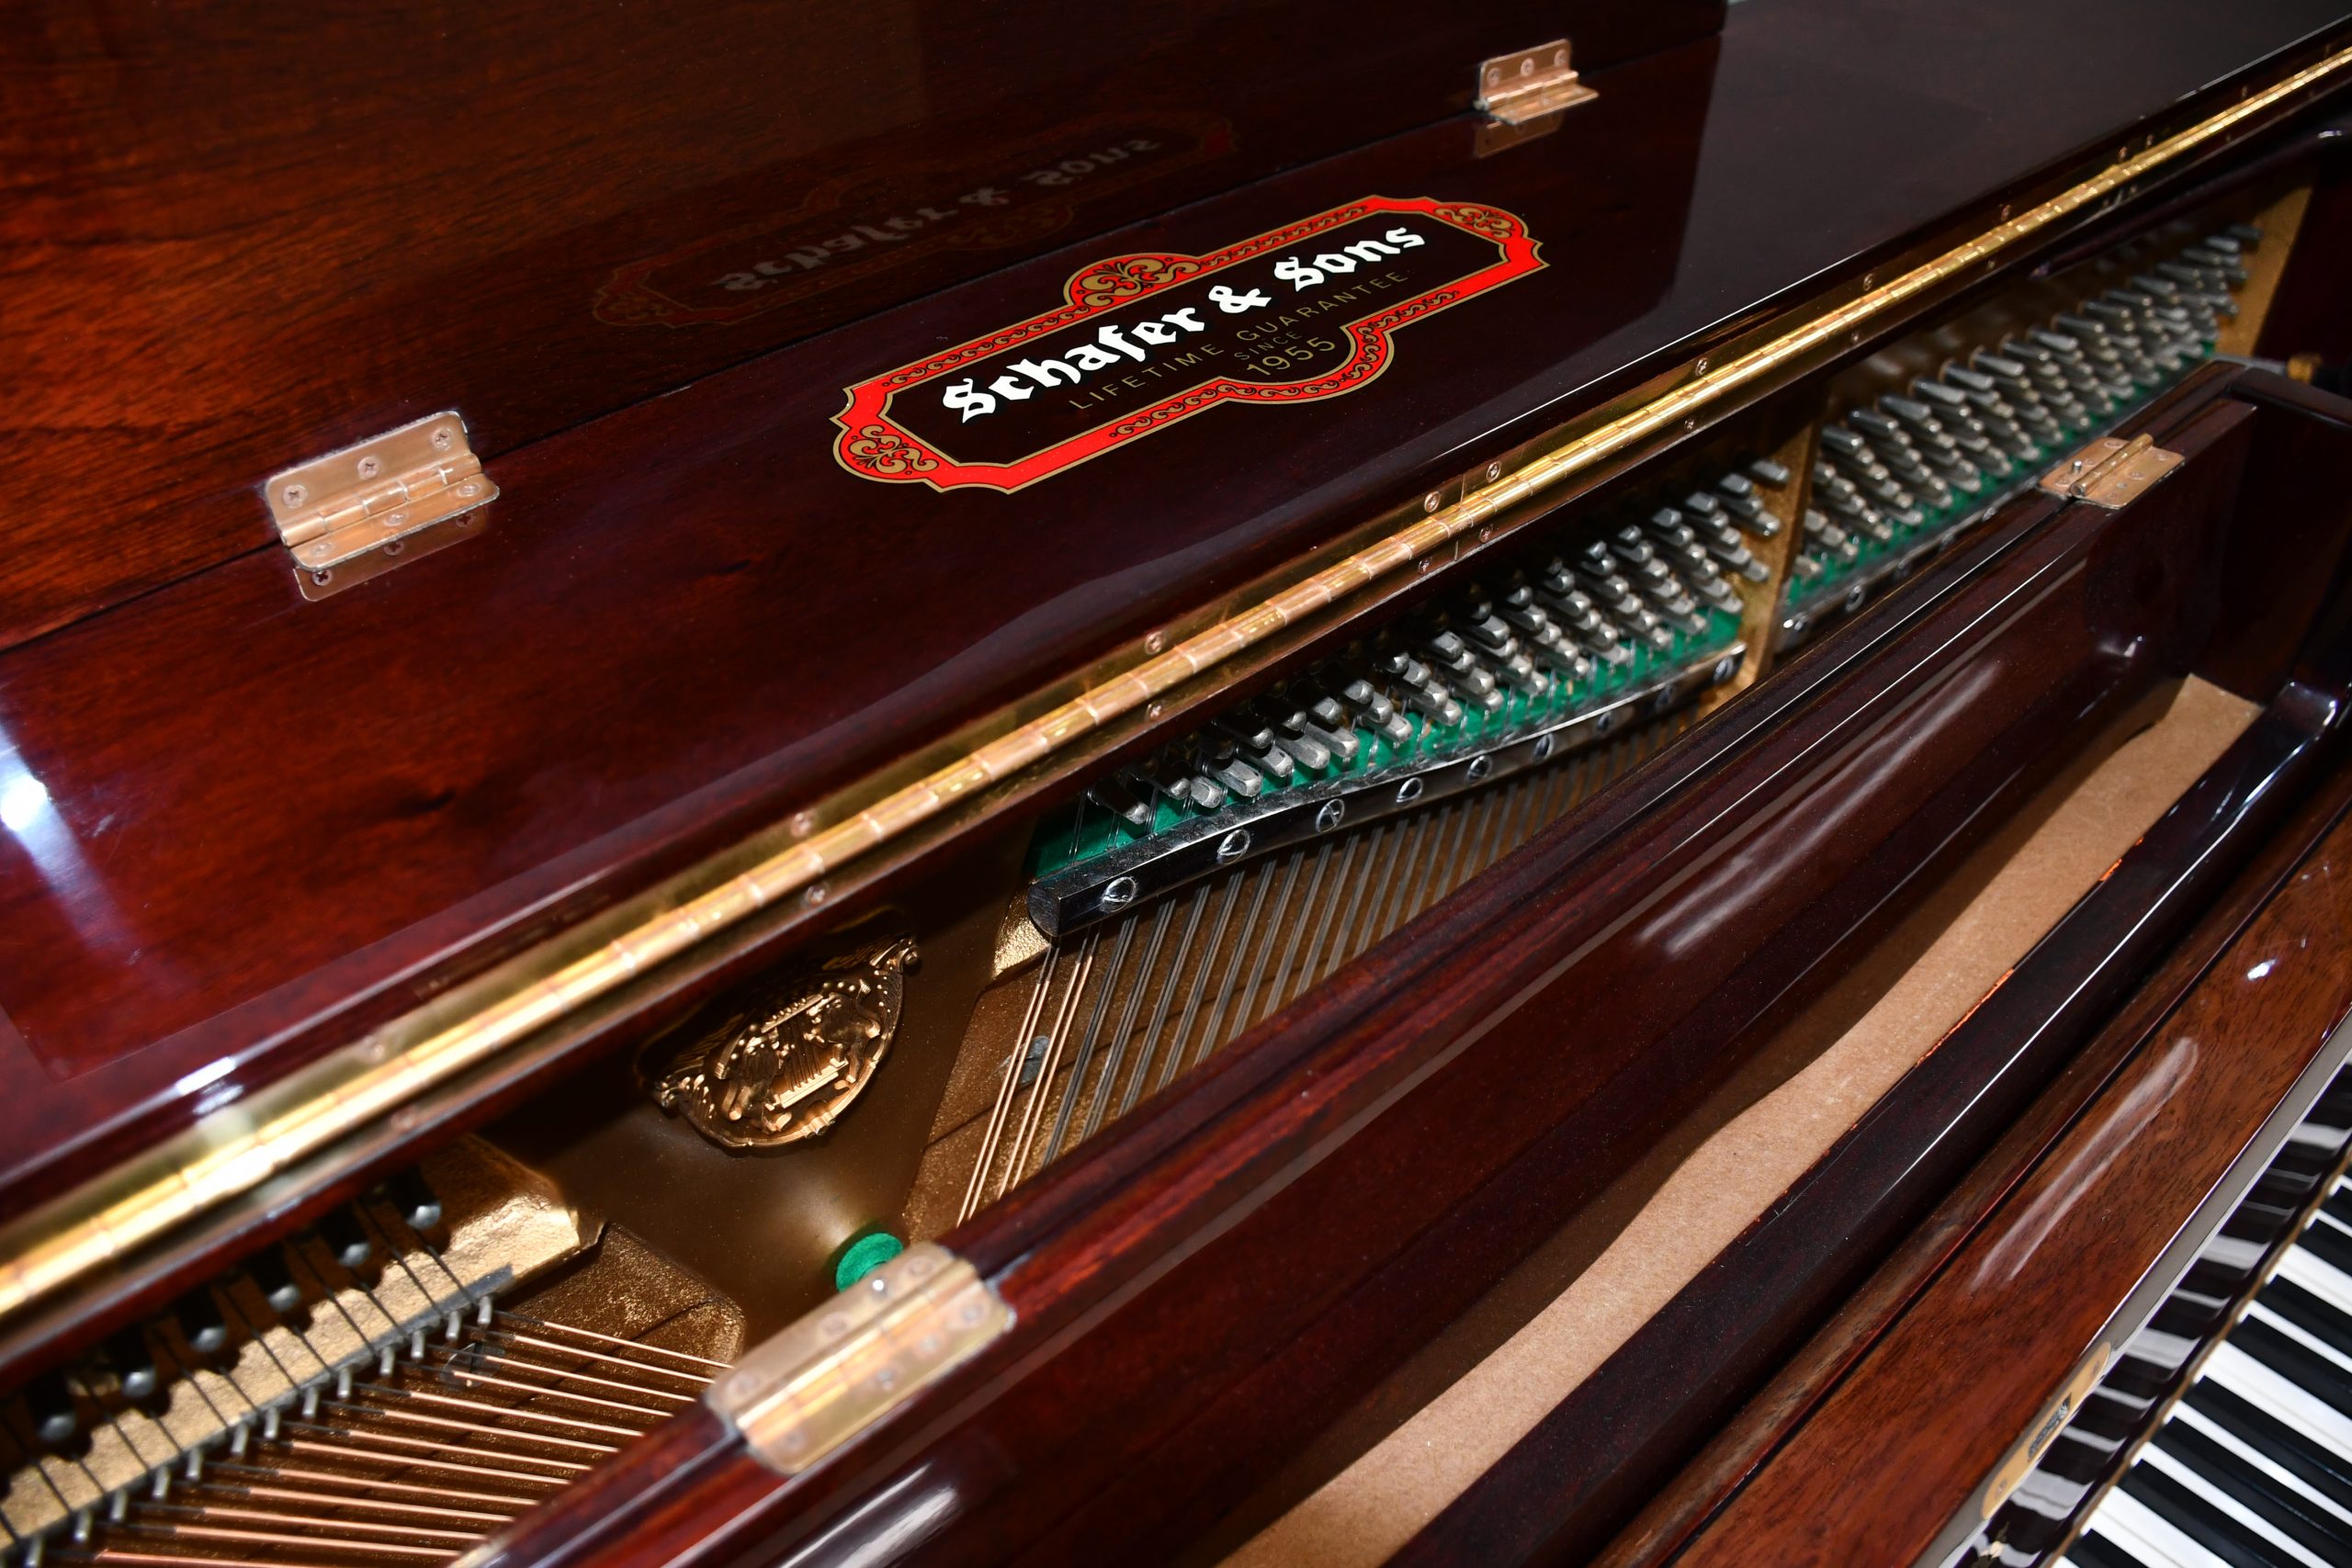 currier piano review